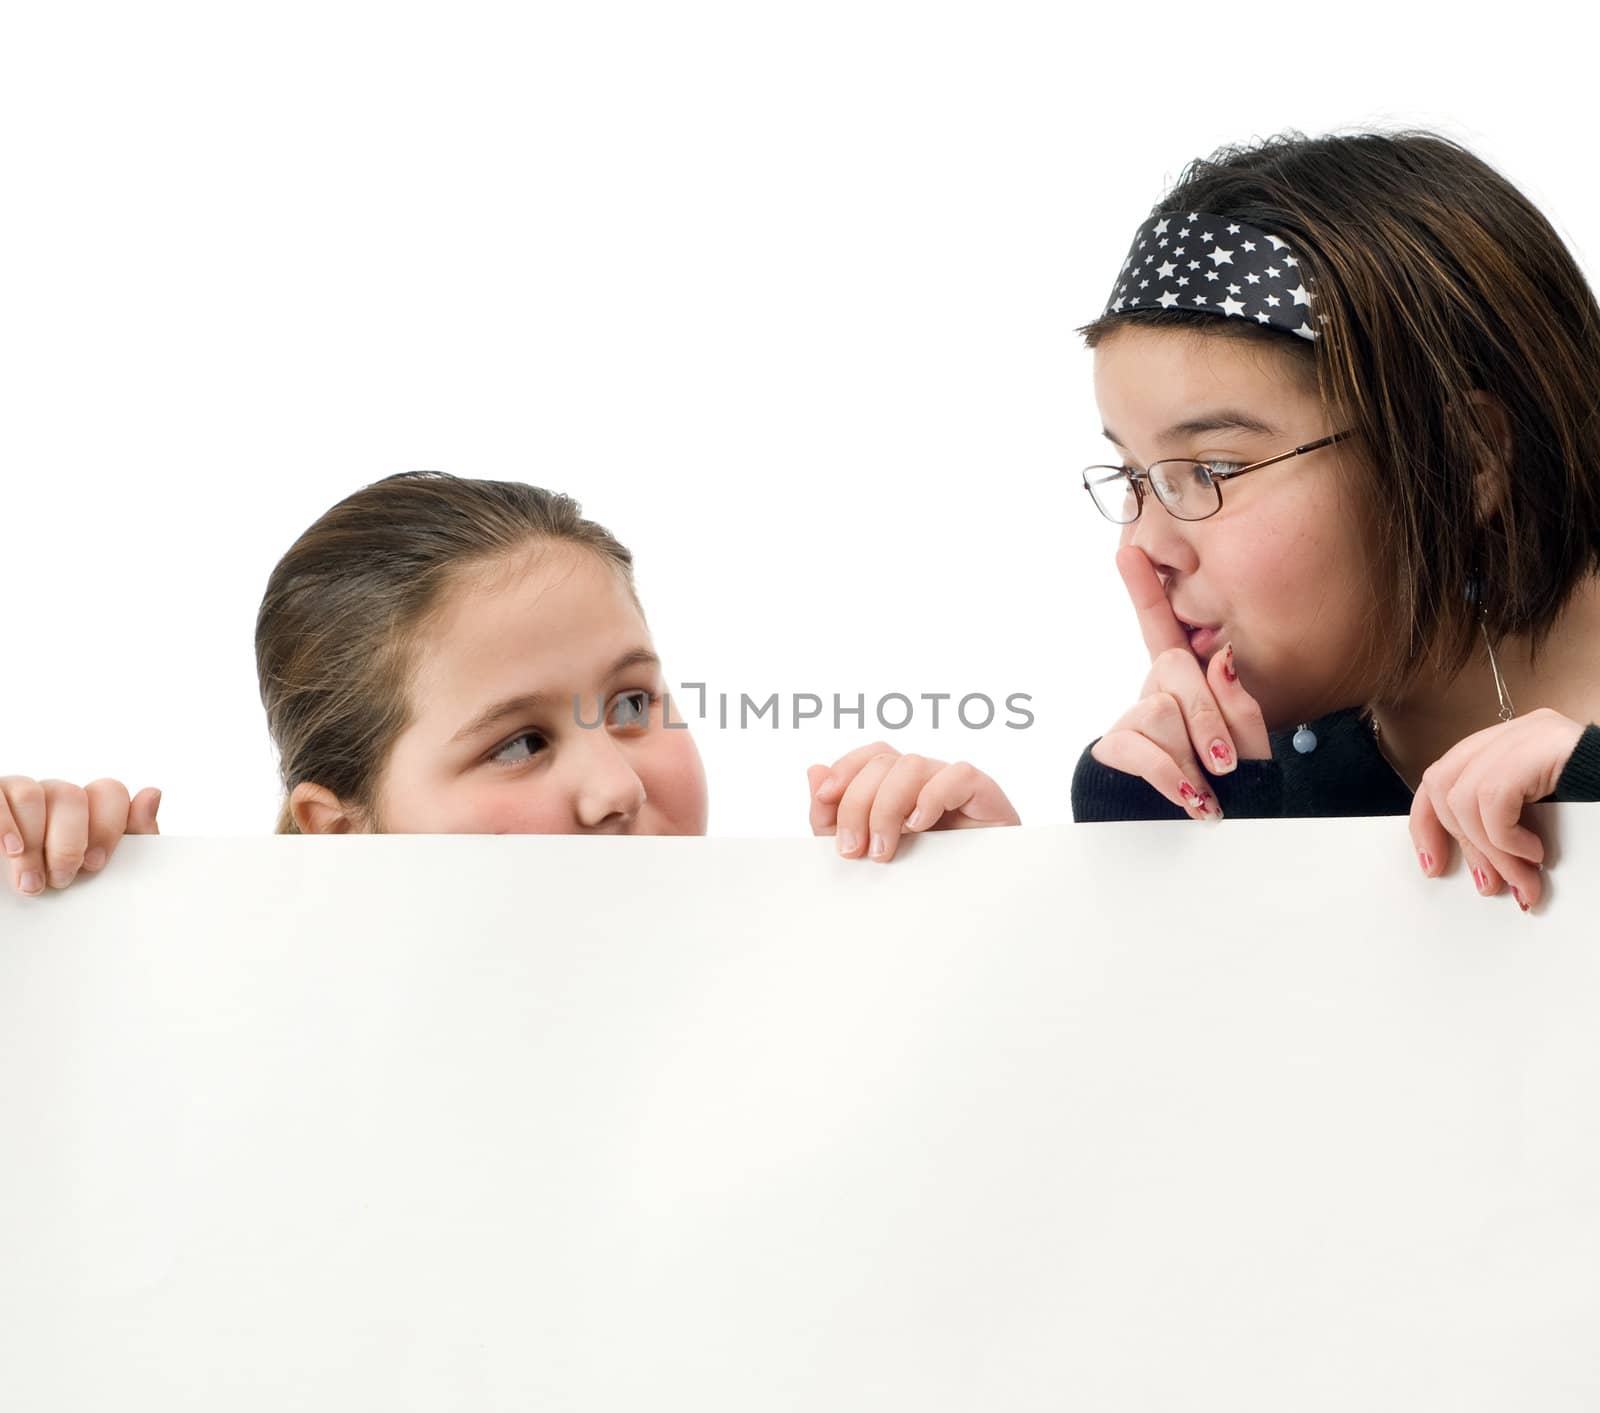 Two young girl trying to spy over a white wall, isolated against a white background